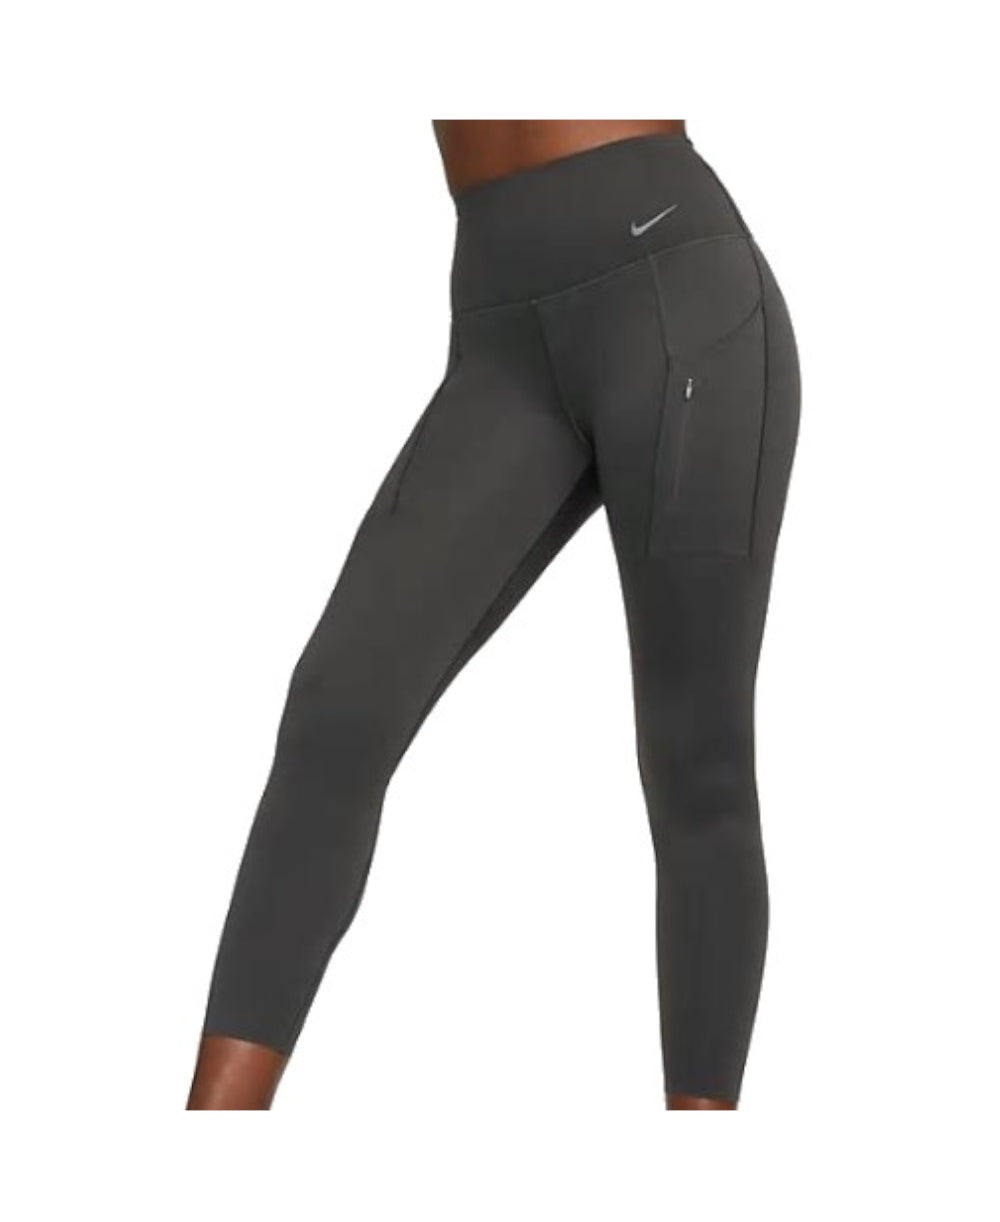 NIKE Go Firm-Support High-Waisted 7/8 moteriškos tamprės